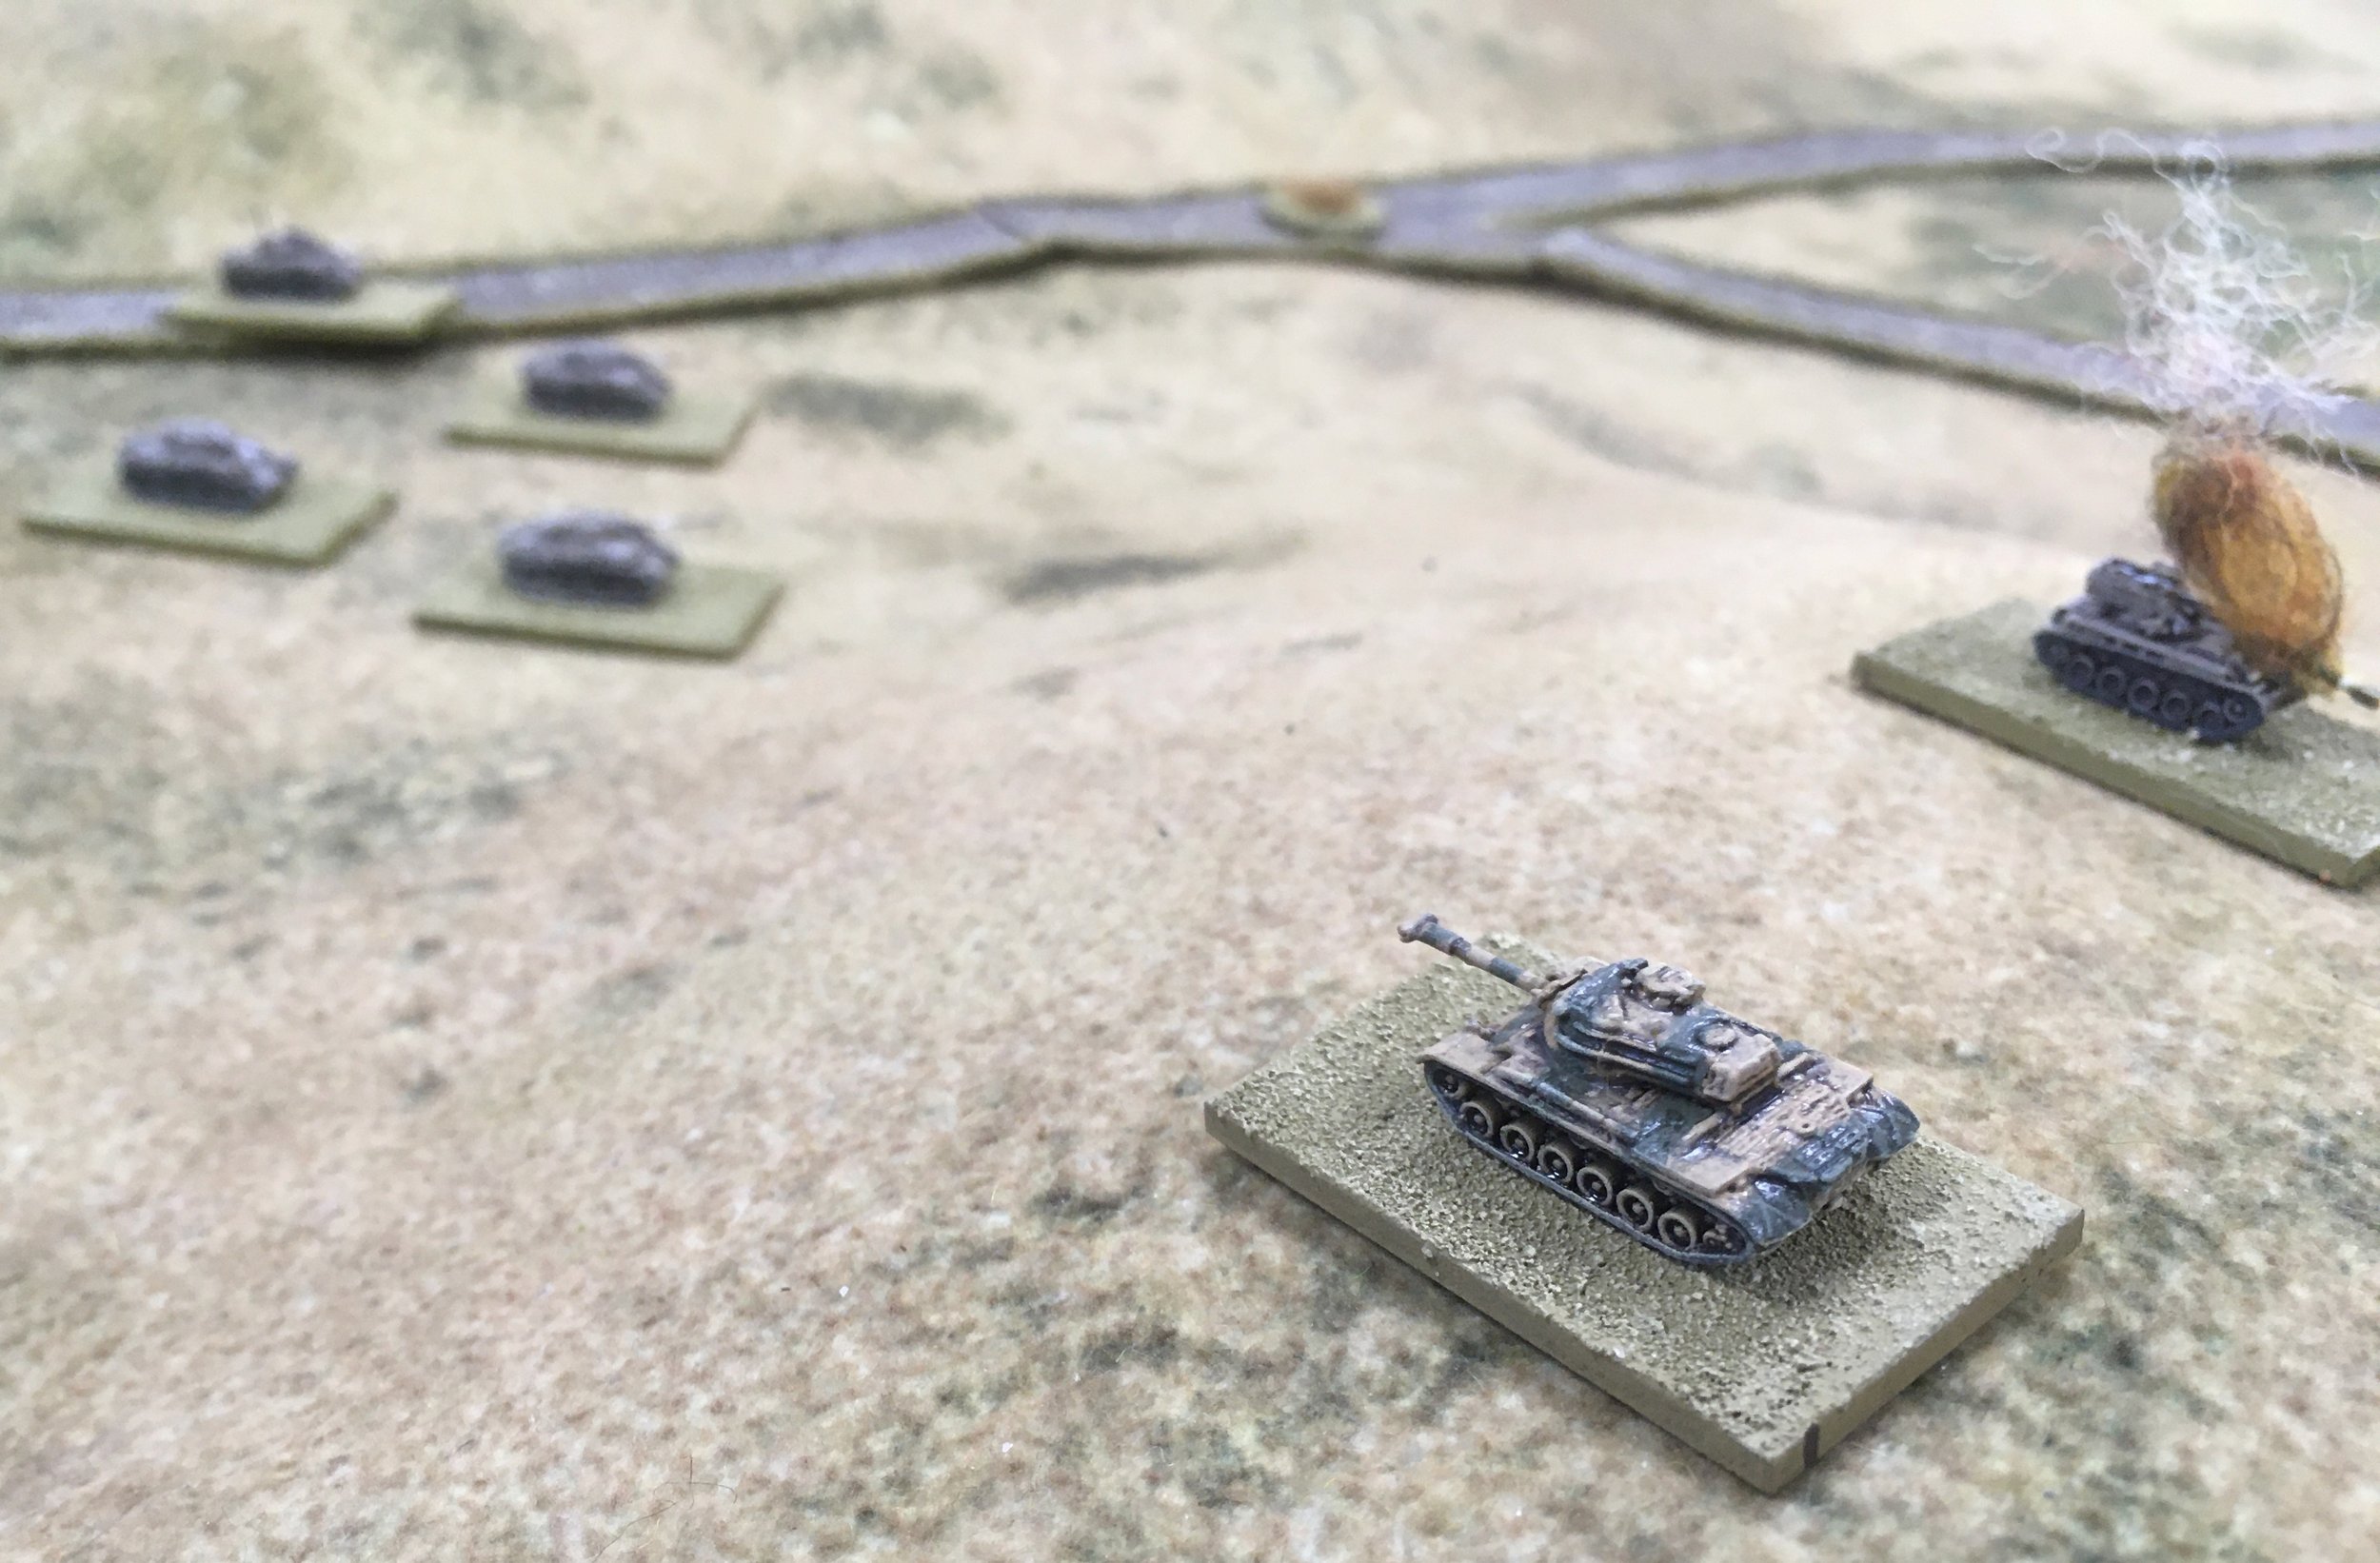 Lieutenant Al-Dardour ordered his platoon forward cresting the hill to reveal a second IDF M-51 platoon led by Sergeant Ronny Rosenthal.